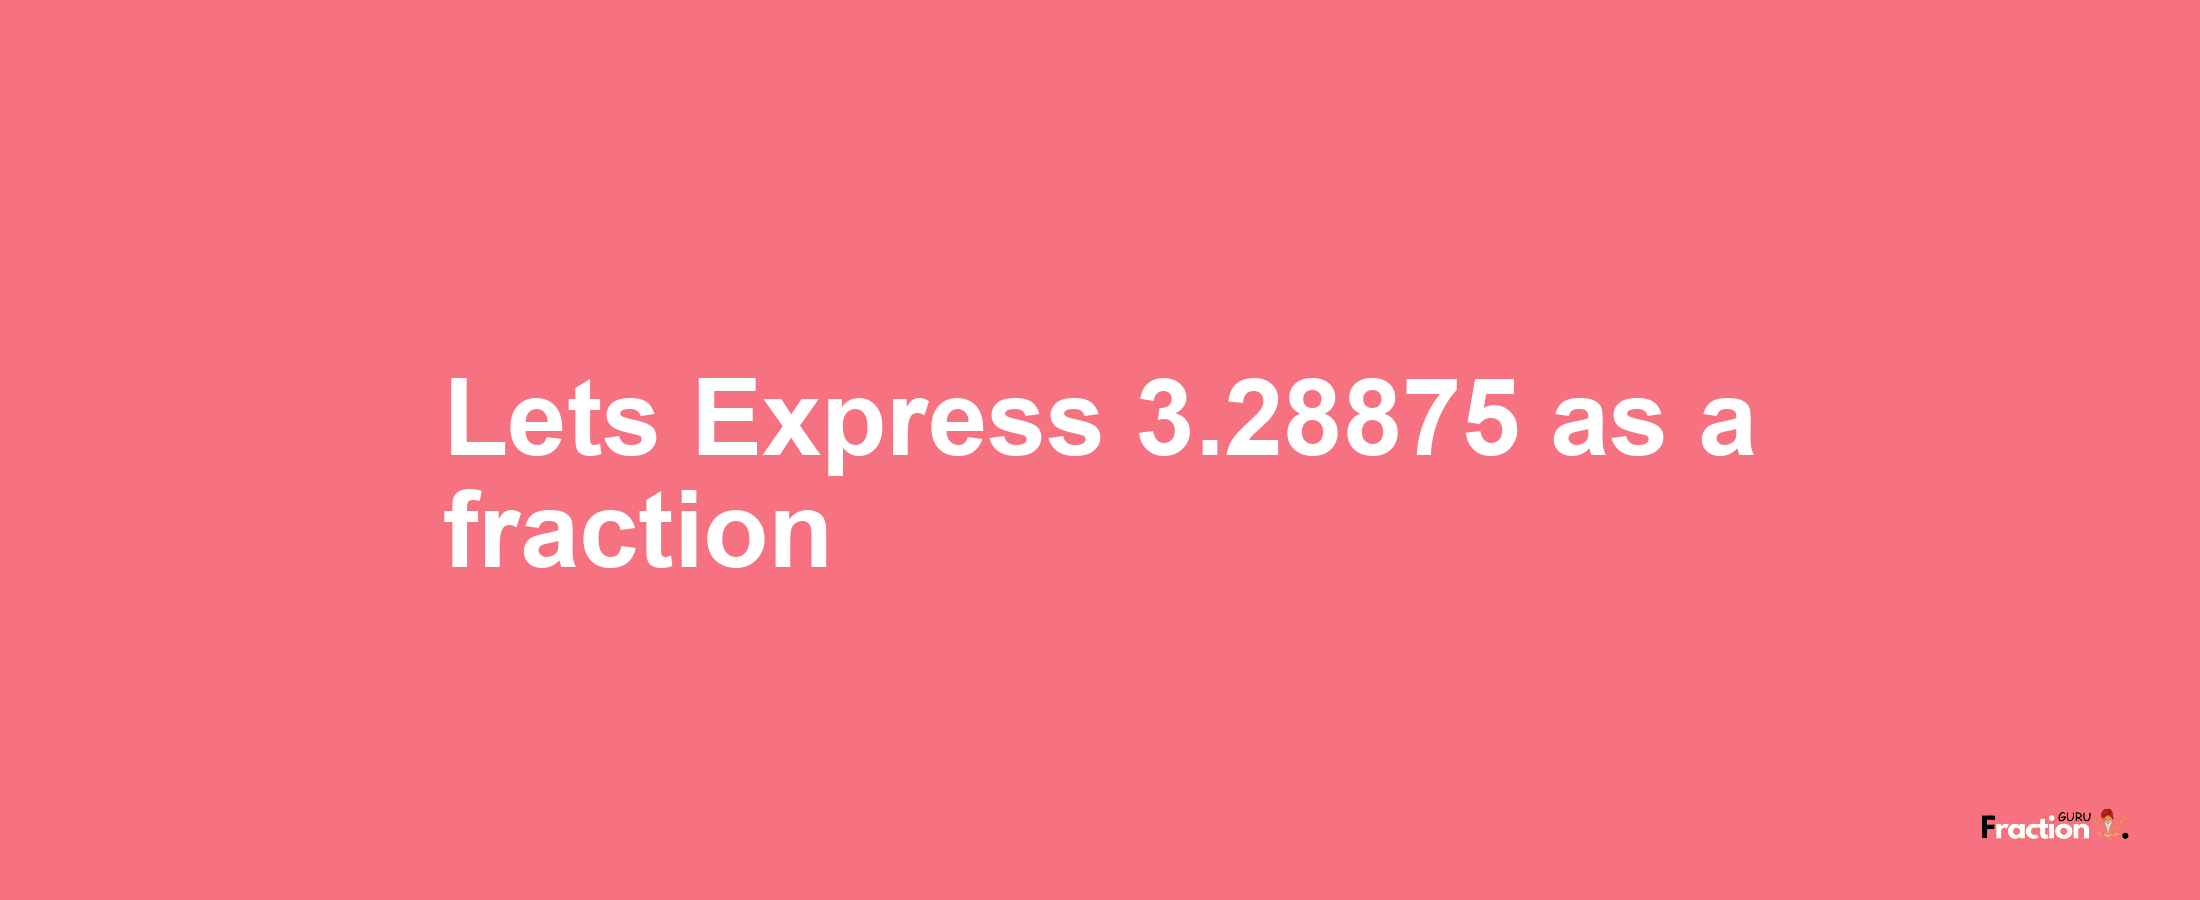 Lets Express 3.28875 as afraction